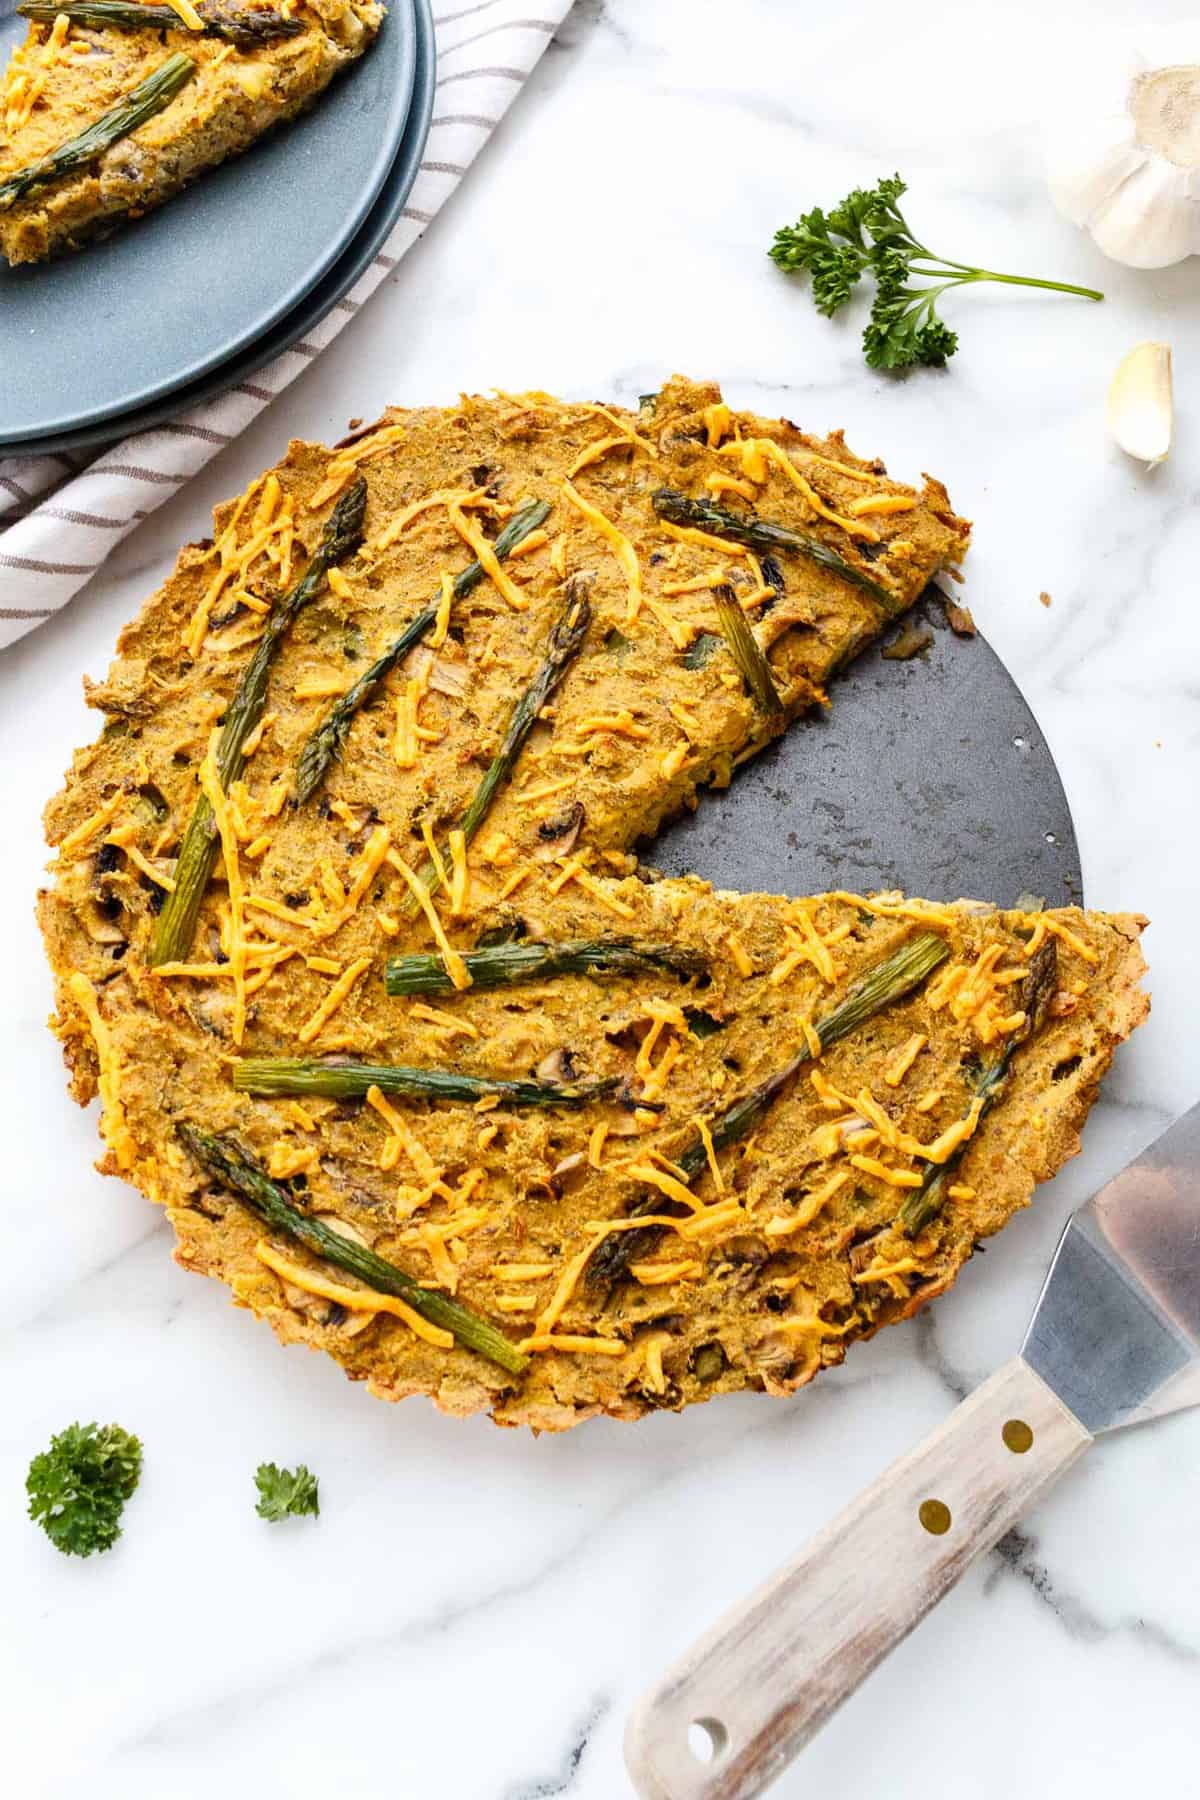 Vegan asparagus and mushroom quiche with hash brown crust with one piece cut out.